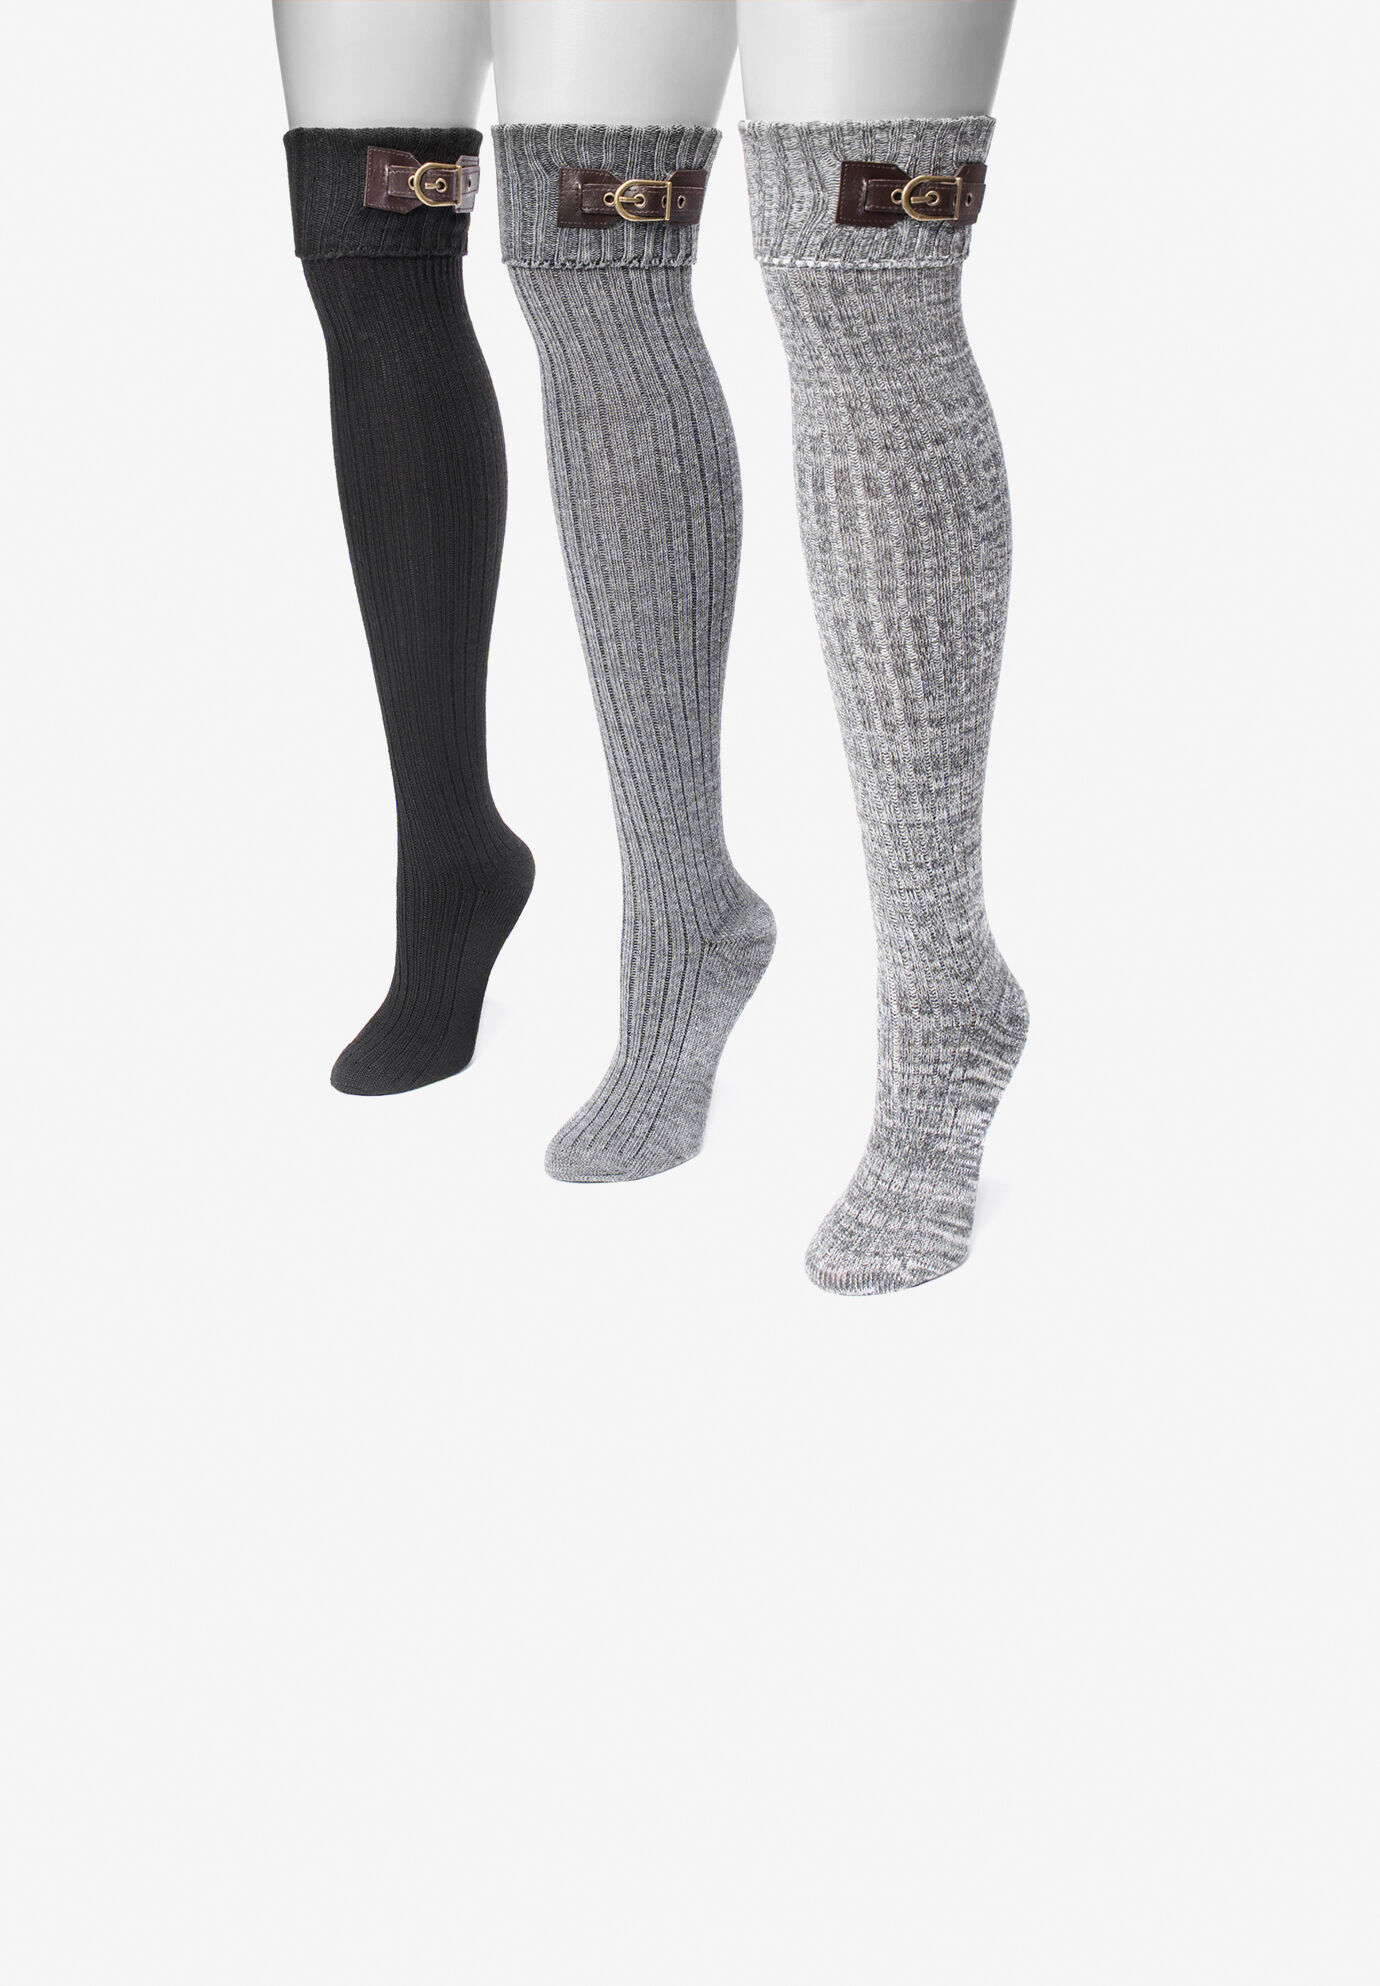 Women's 3 Pair Buckle Cuff Over The Knee Socks by MUK LUKS in Black (Size ONE)